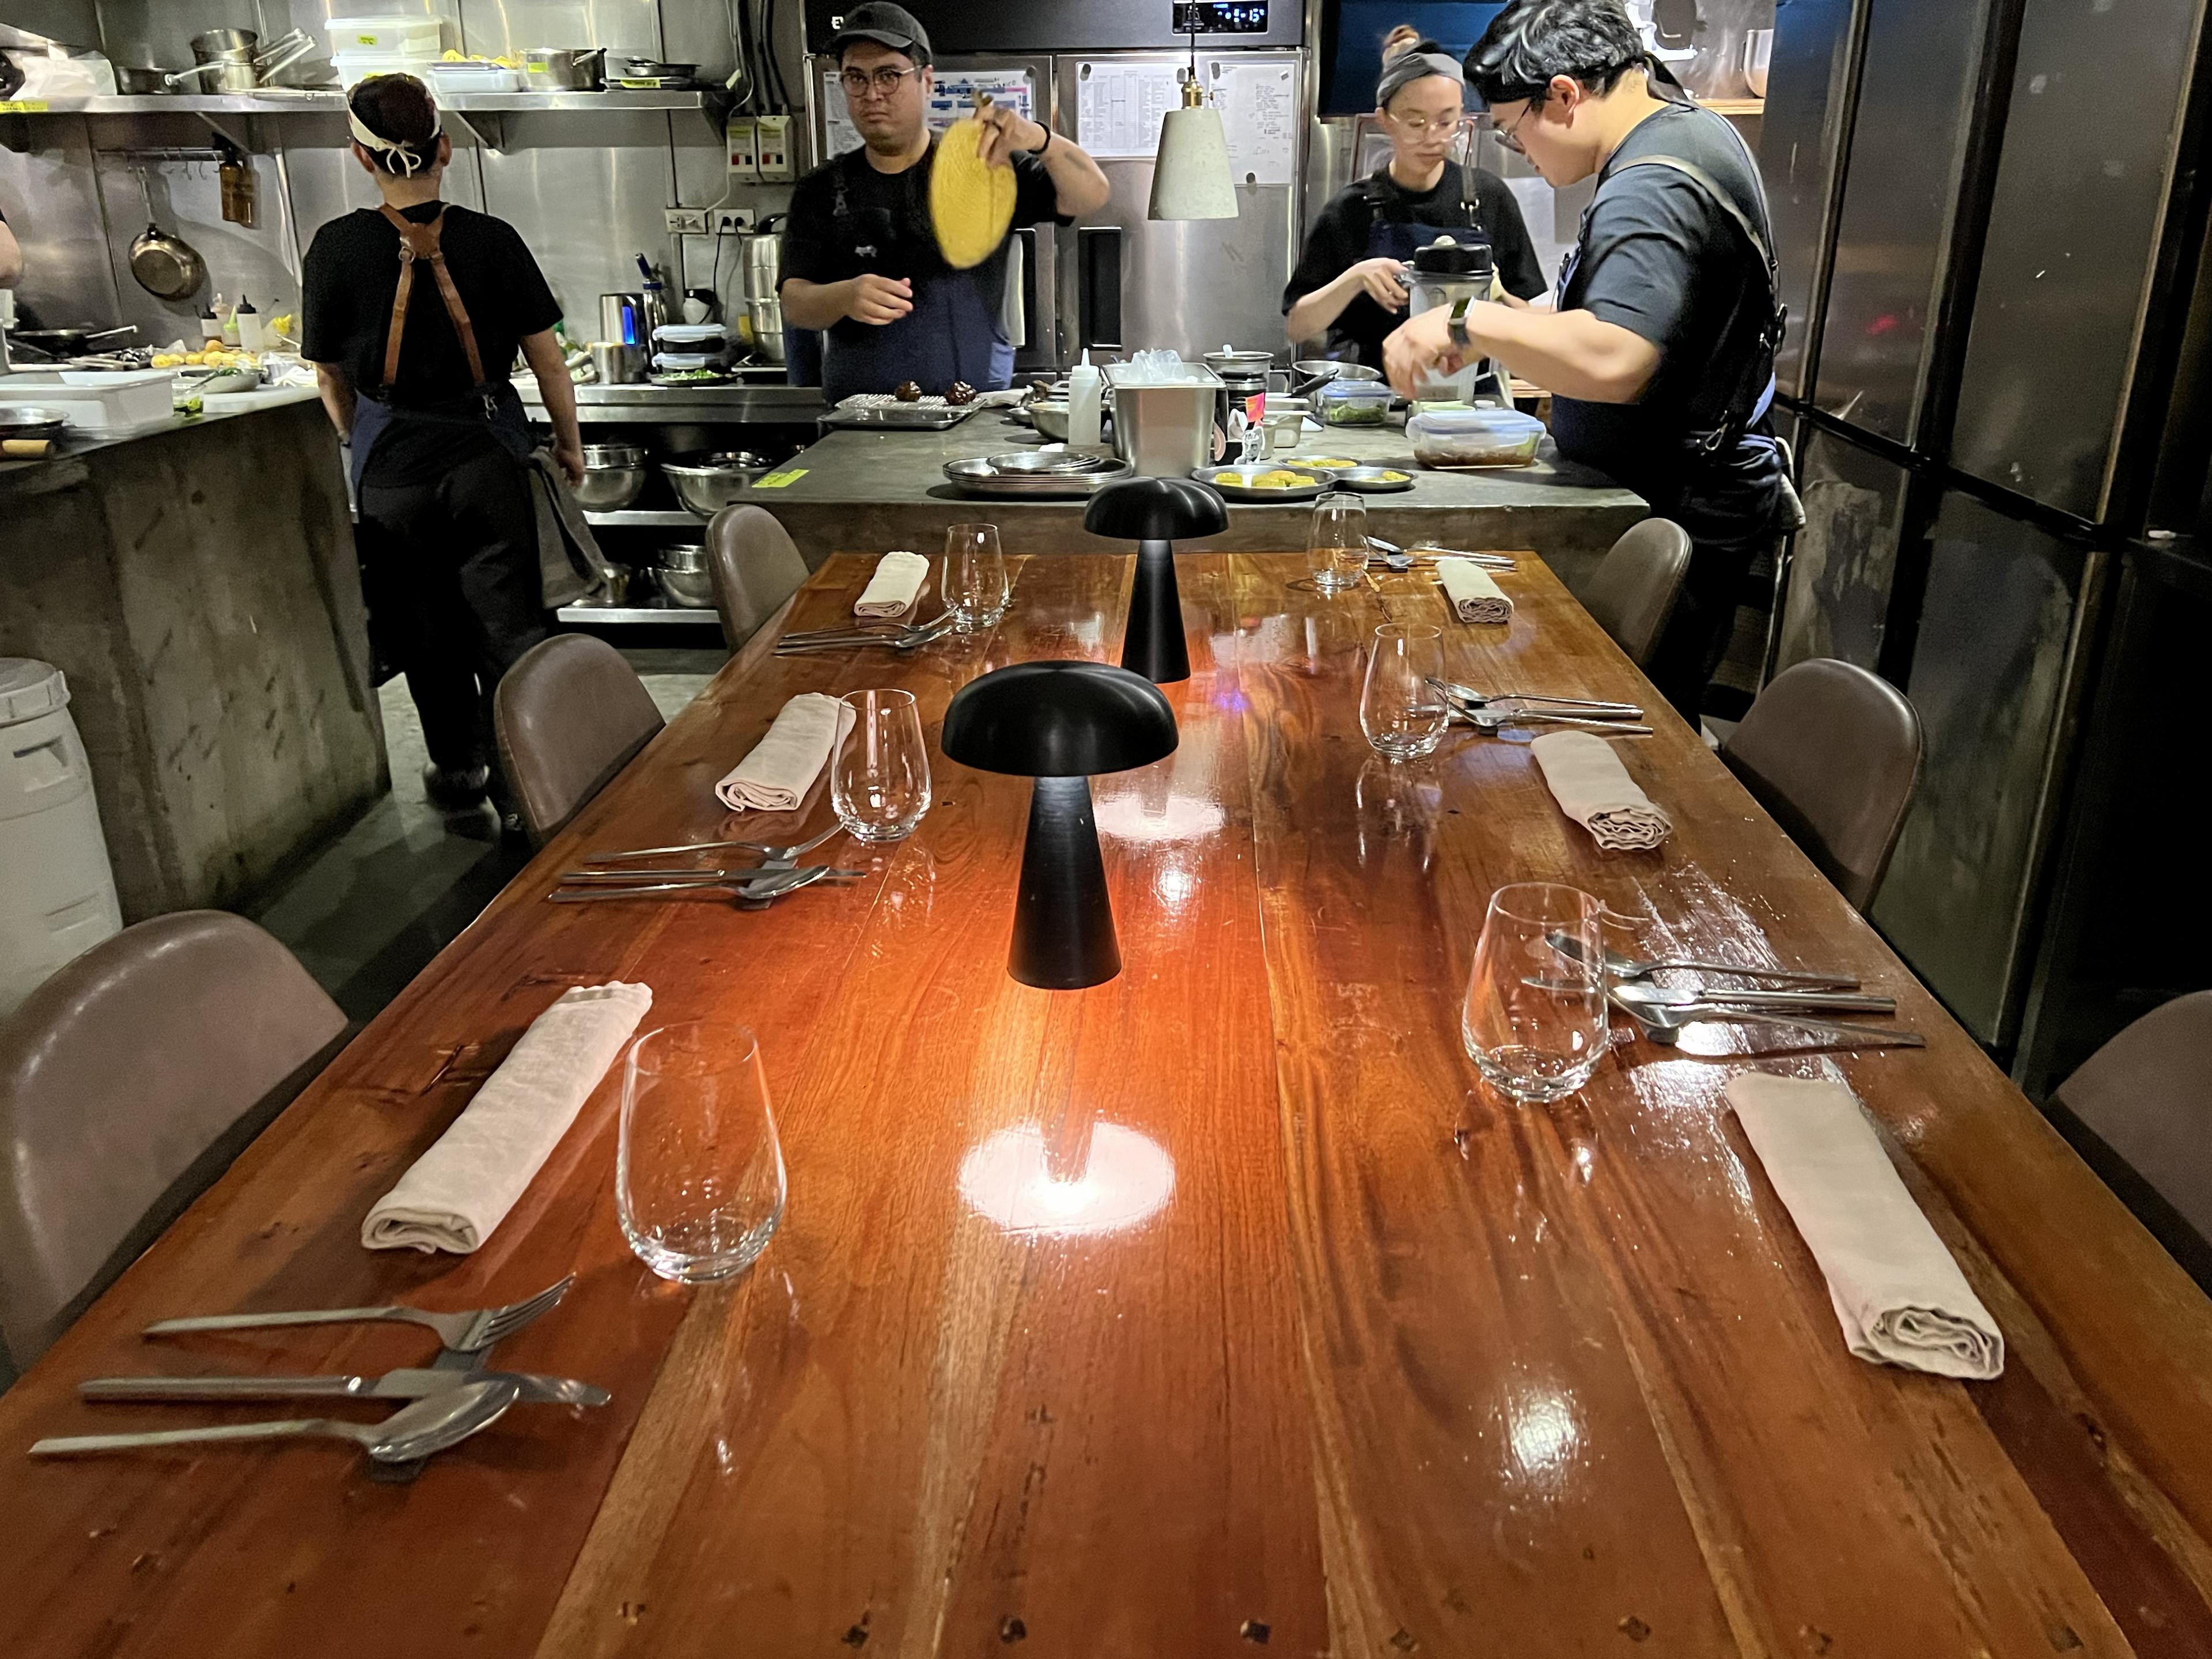 wooden table set for dinner inside restaurant kitchen where staff works at metal counters